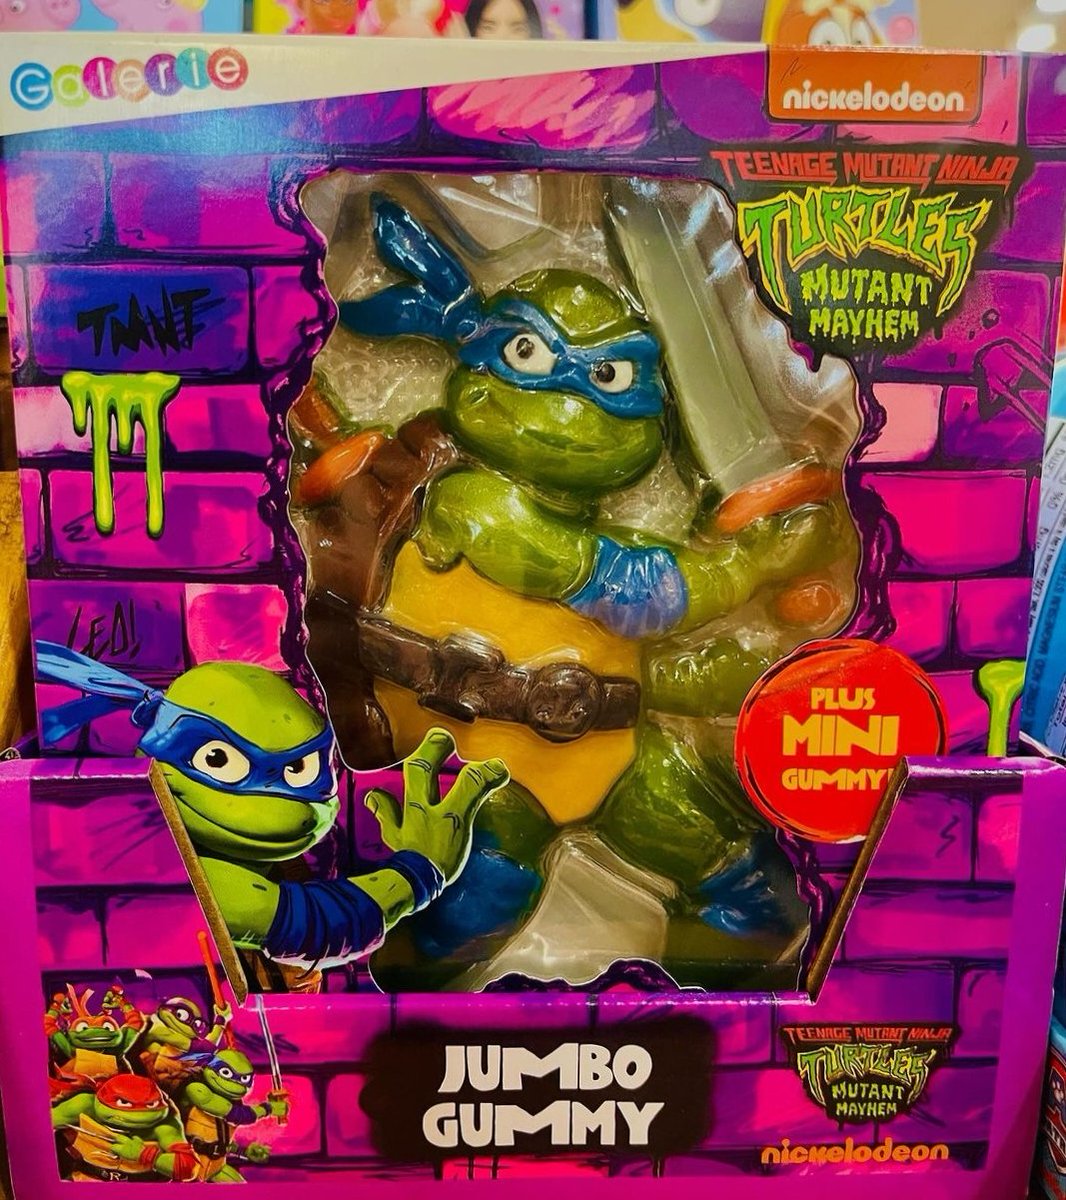 Cowabunga! It's Turtle Time and time to visit Rocket Fizz! 🚀 #rocketfizz #ninjaturtles #tmnt #teenagemutantninjaturtles #gummycandy #candy 📷: Rocket Fizz Staten Island, NY *products vary by location*